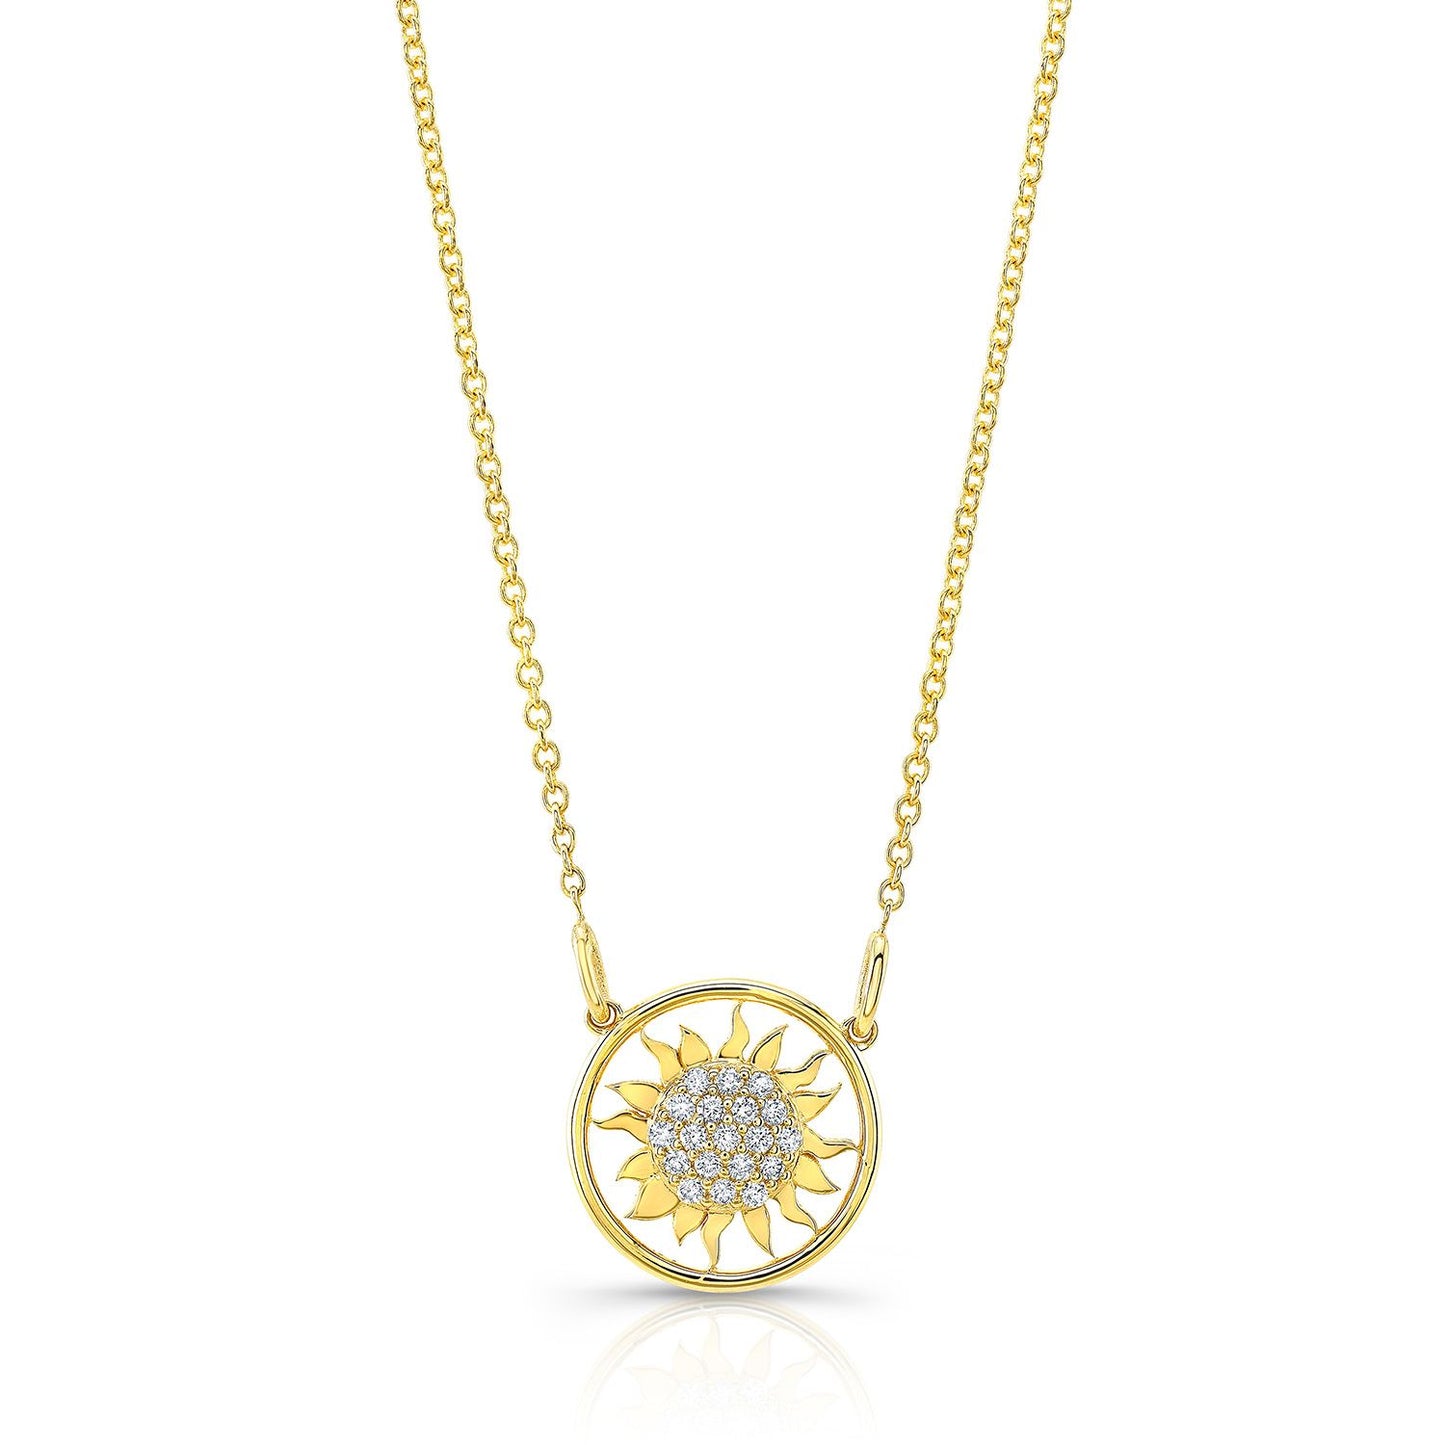 Diamond Sun Necklace With Round Frame In 14k Yellow Gold, 18-inch Chain